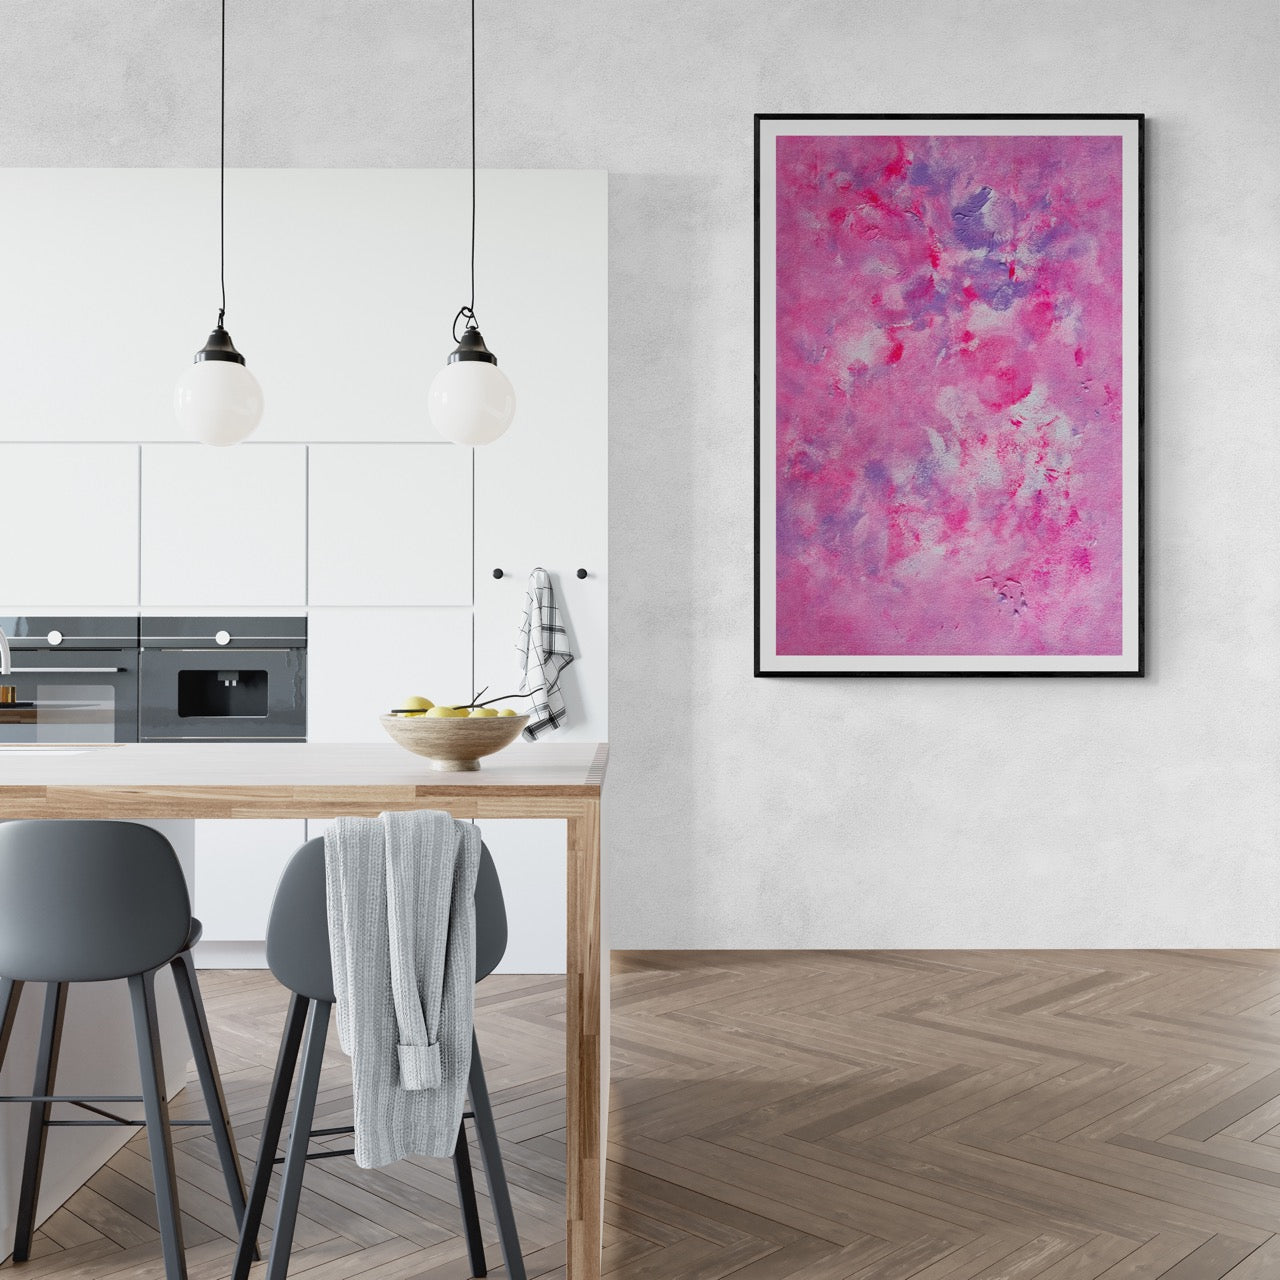 Pink, purple and white abstract art poster with a black frame hanging vertically on a white wall next to a minimalistic white kitchen. The floor is wood and herringbone pattern and there is a dining room table in front